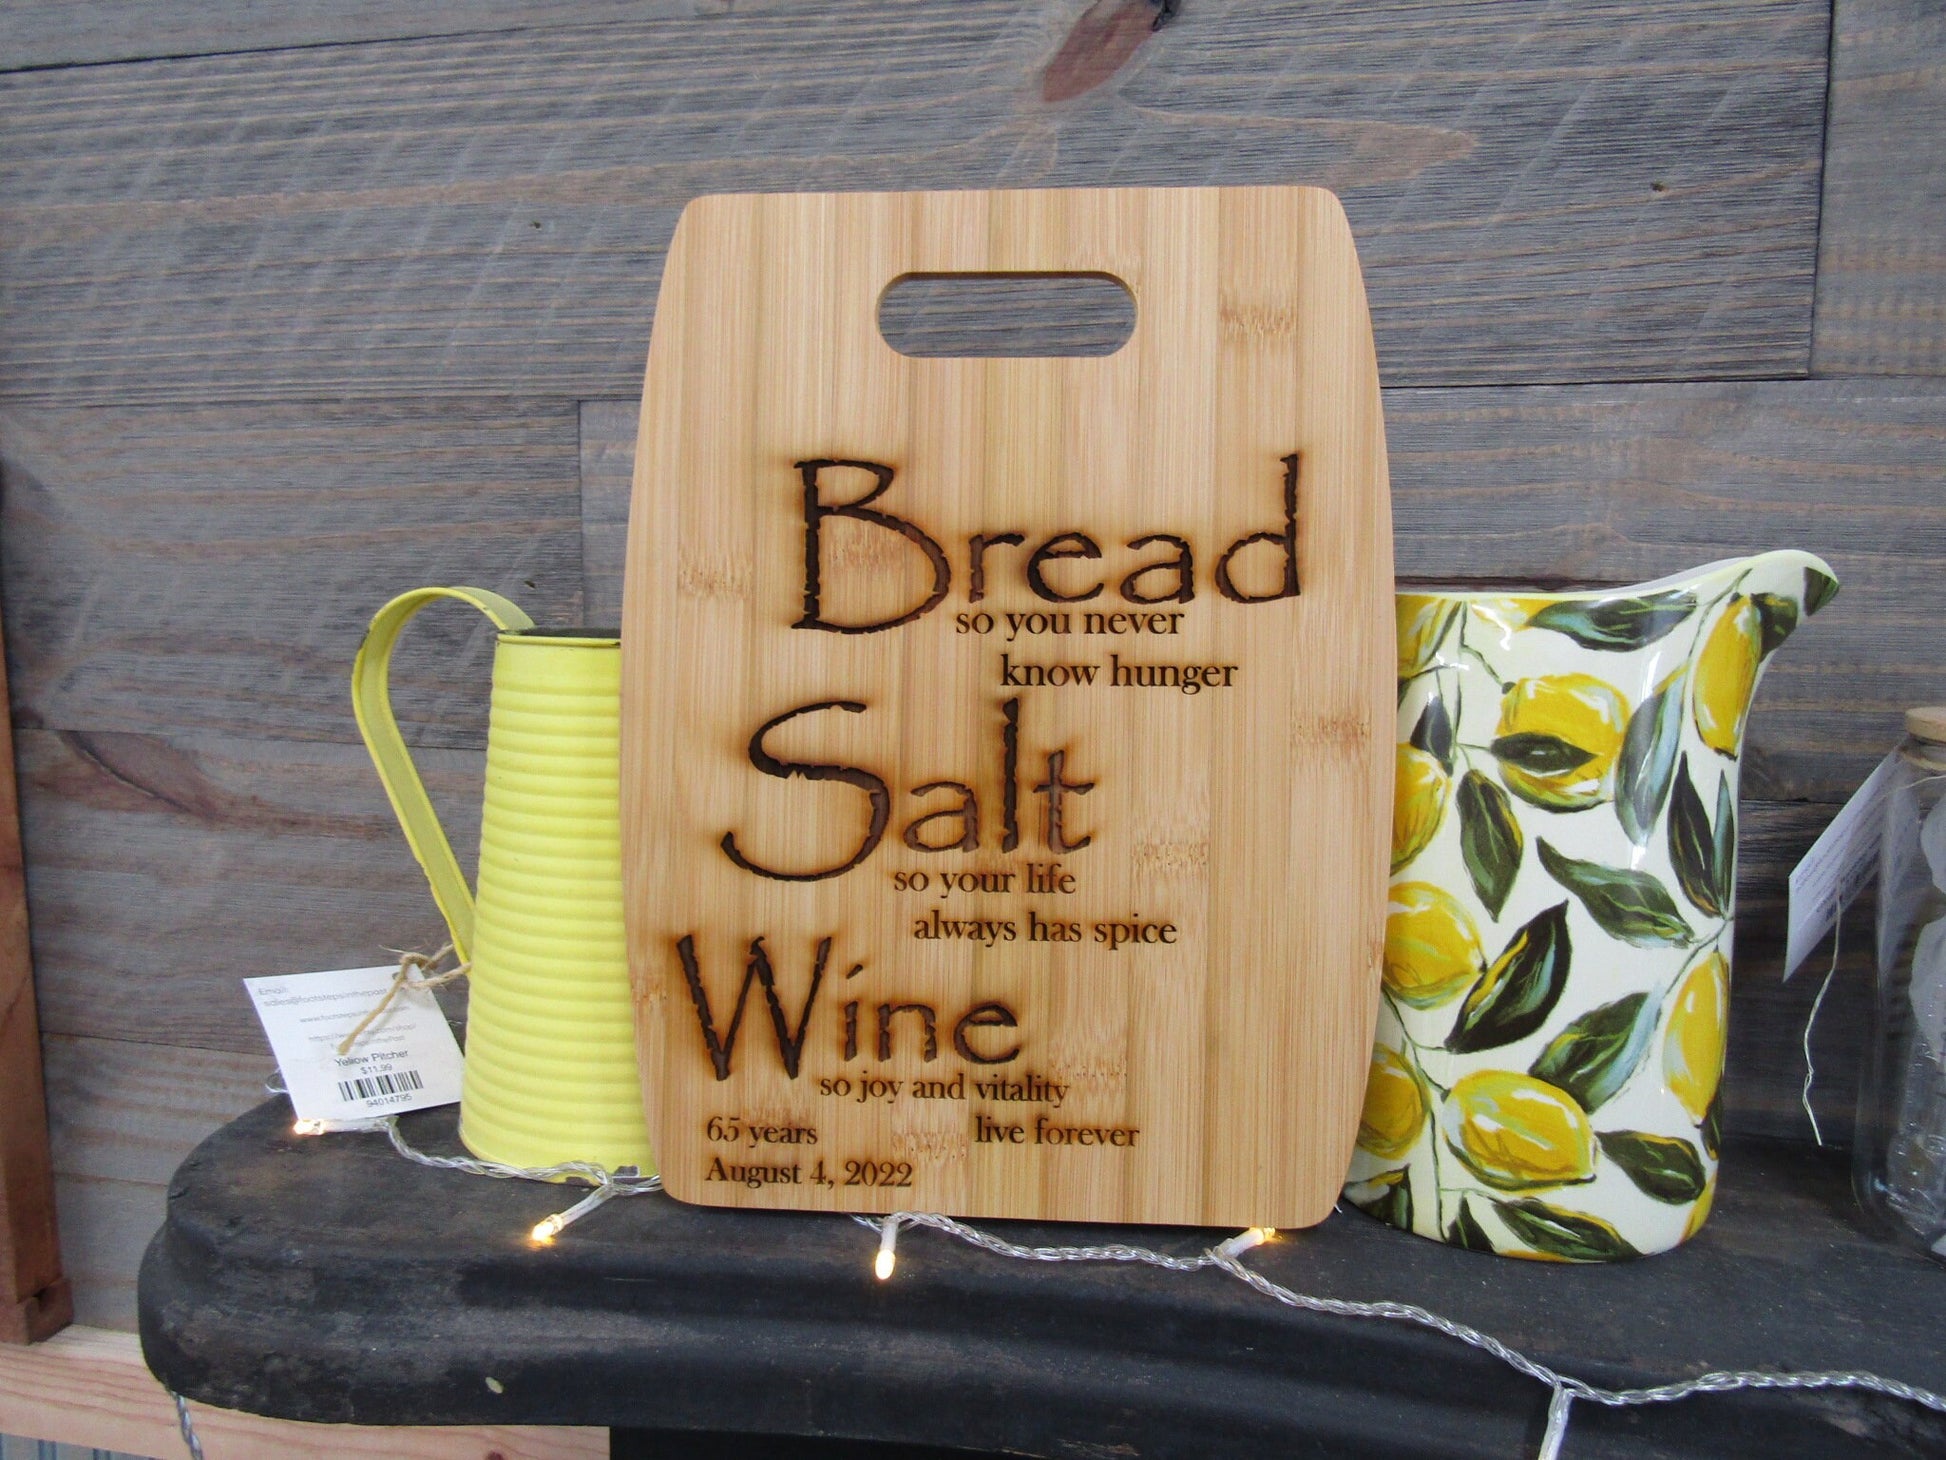 Personalize your own Bamboo Wood Cutting Board